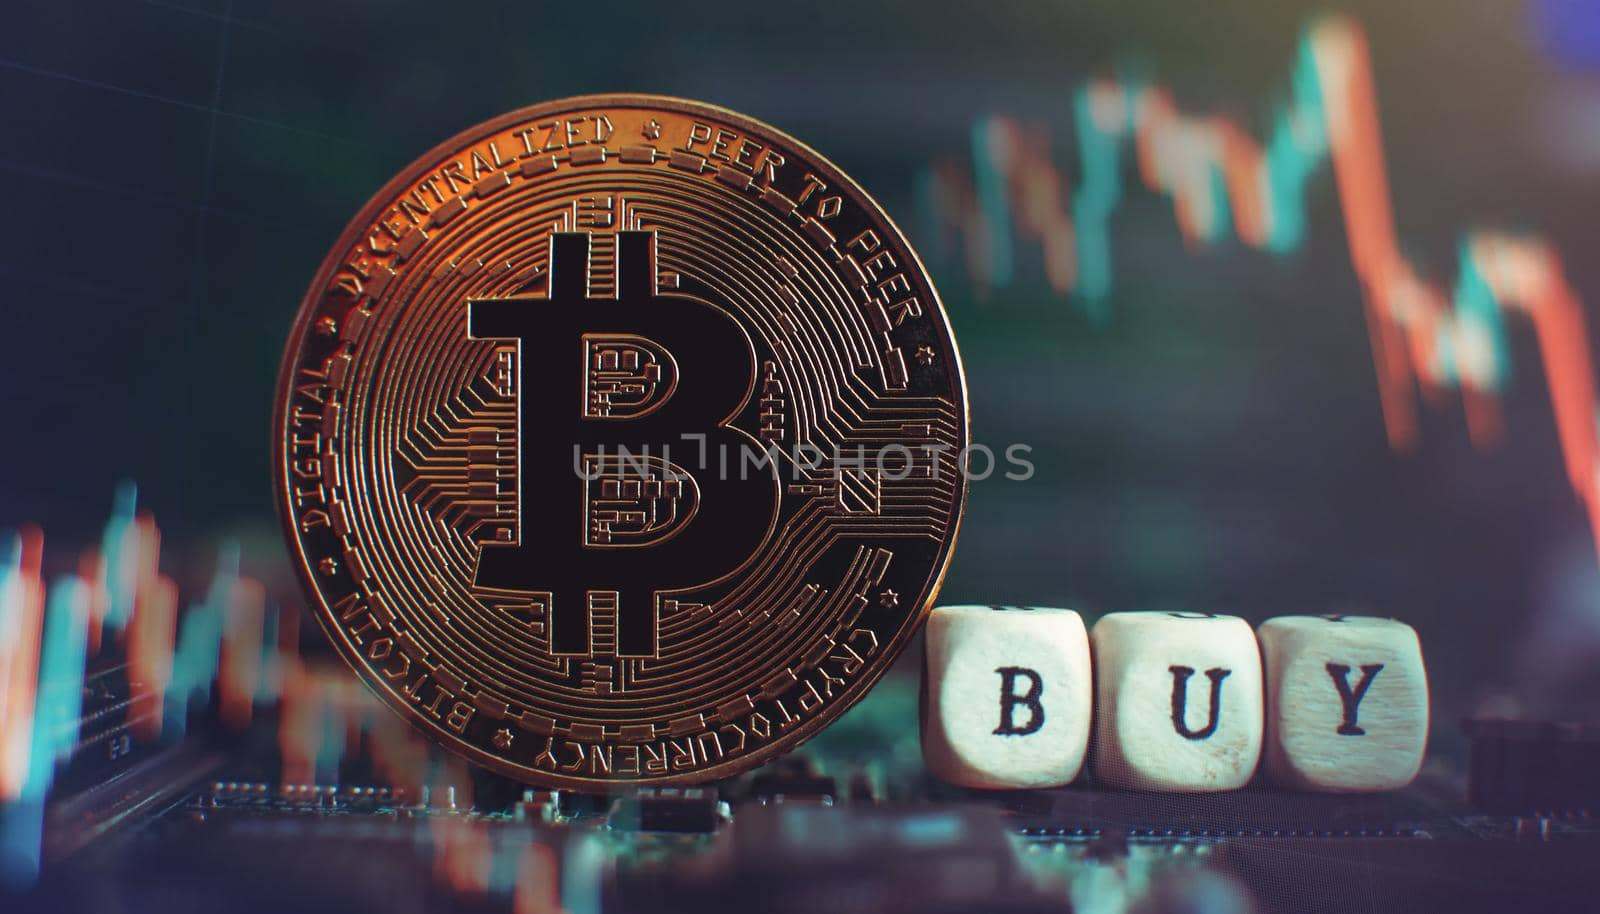 Golden coins with bitcoin symbol buy on a mainboard. Stock Market Concept, digital money and stock business. by Maximusnd